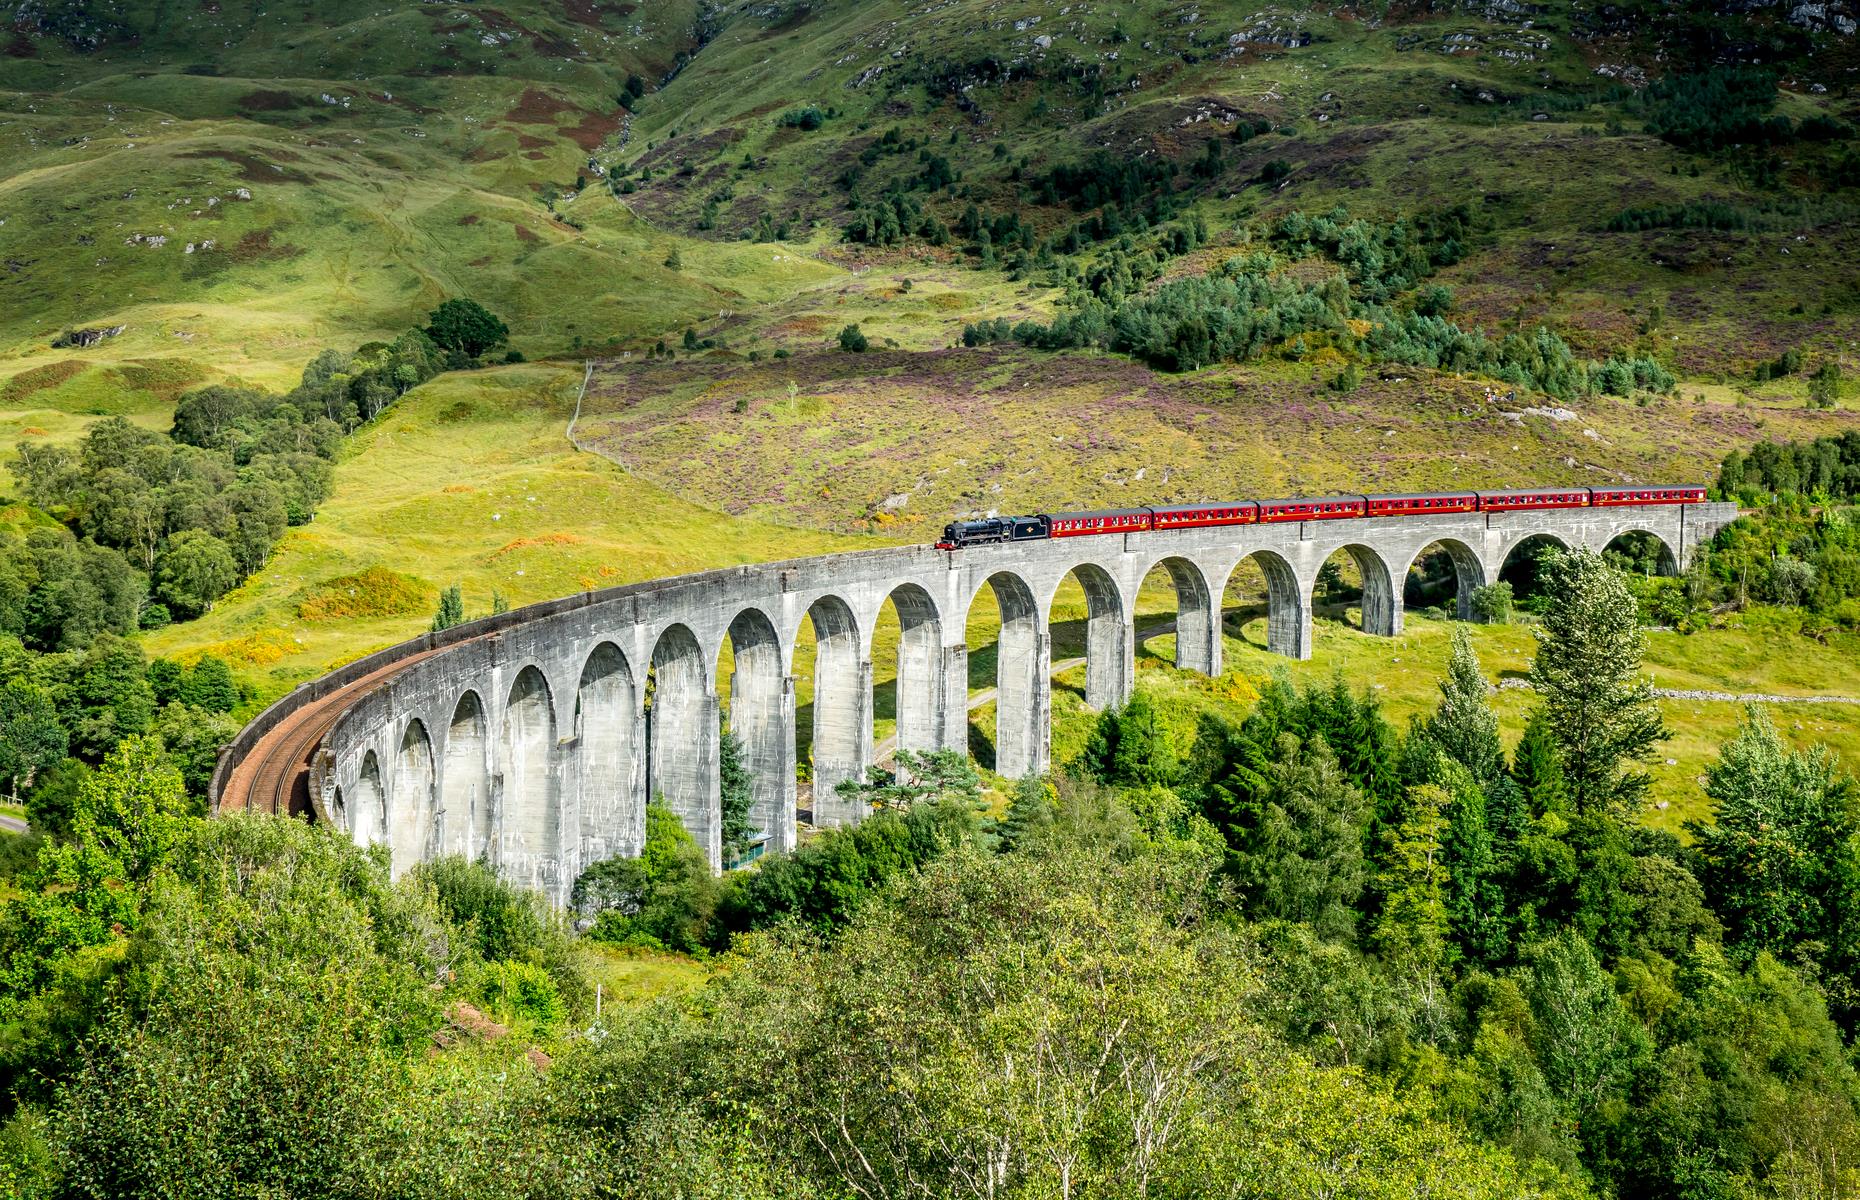 <p>Located in the stunning Scottish Highlands, the Glenfinnan Railway viaduct is one of Scotland’s most famous landmarks. Completed in the early 20th century, the 1,000 foot long (305m) arched structure stretches across the River Finnan near <a href="https://www.loveexploring.com/news/72416/things-to-do-in-fort-william-the-outdoor-capital-of-britain">Fort William.</a> With its magical setting, the marvellous feat of engineering has been featured in numerous Harry Potter films as the iconic Hogwarts Express. The Jacobite Steam train loops between Fort William and Mallaig through the scenic countryside and is often considered one of the best railway journeys in the world. </p>  <p><strong><a href="https://www.loveexploring.com/galleries/105935/these-are-the-uks-most-beautiful-train-stations?page=1">These are the UK’s most beautiful train stations</a></strong></p>